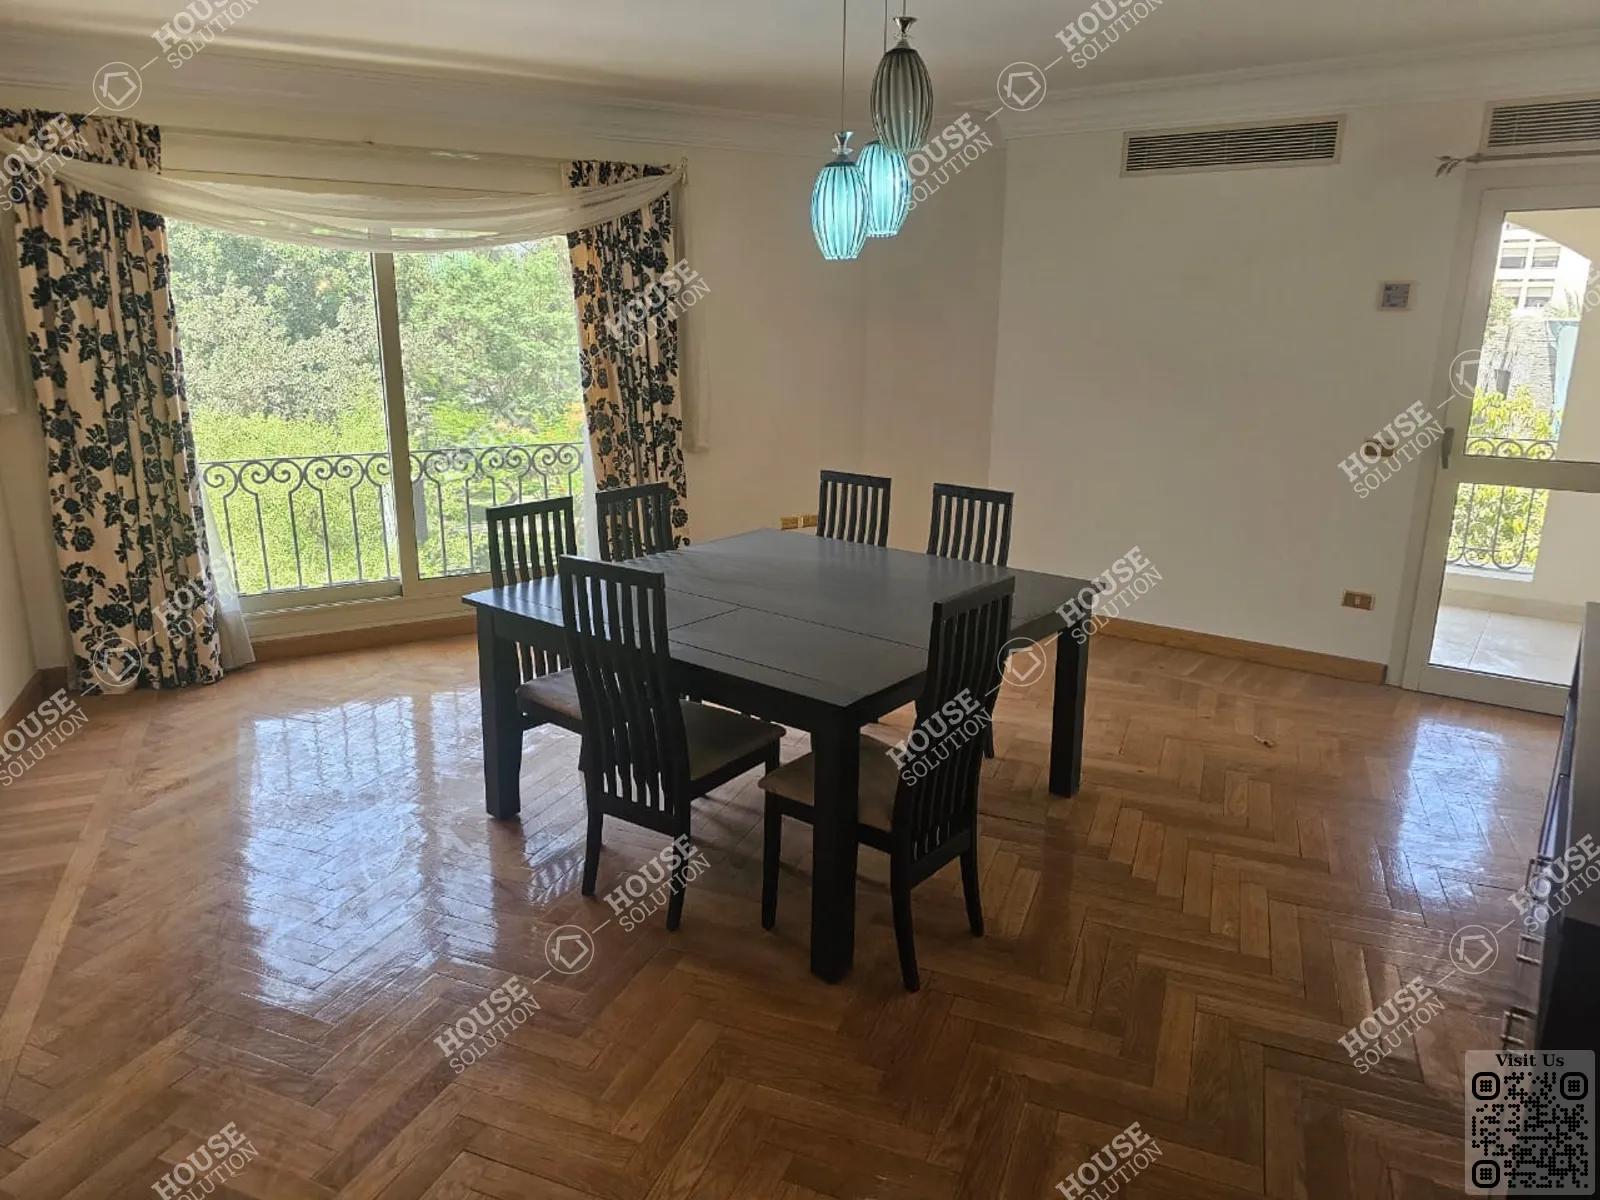 DINING AREA @ Apartments For Rent In Maadi Maadi Sarayat Area: 225 m² consists of 4 Bedrooms 3 Bathrooms Modern furnished 5 stars #5891-2